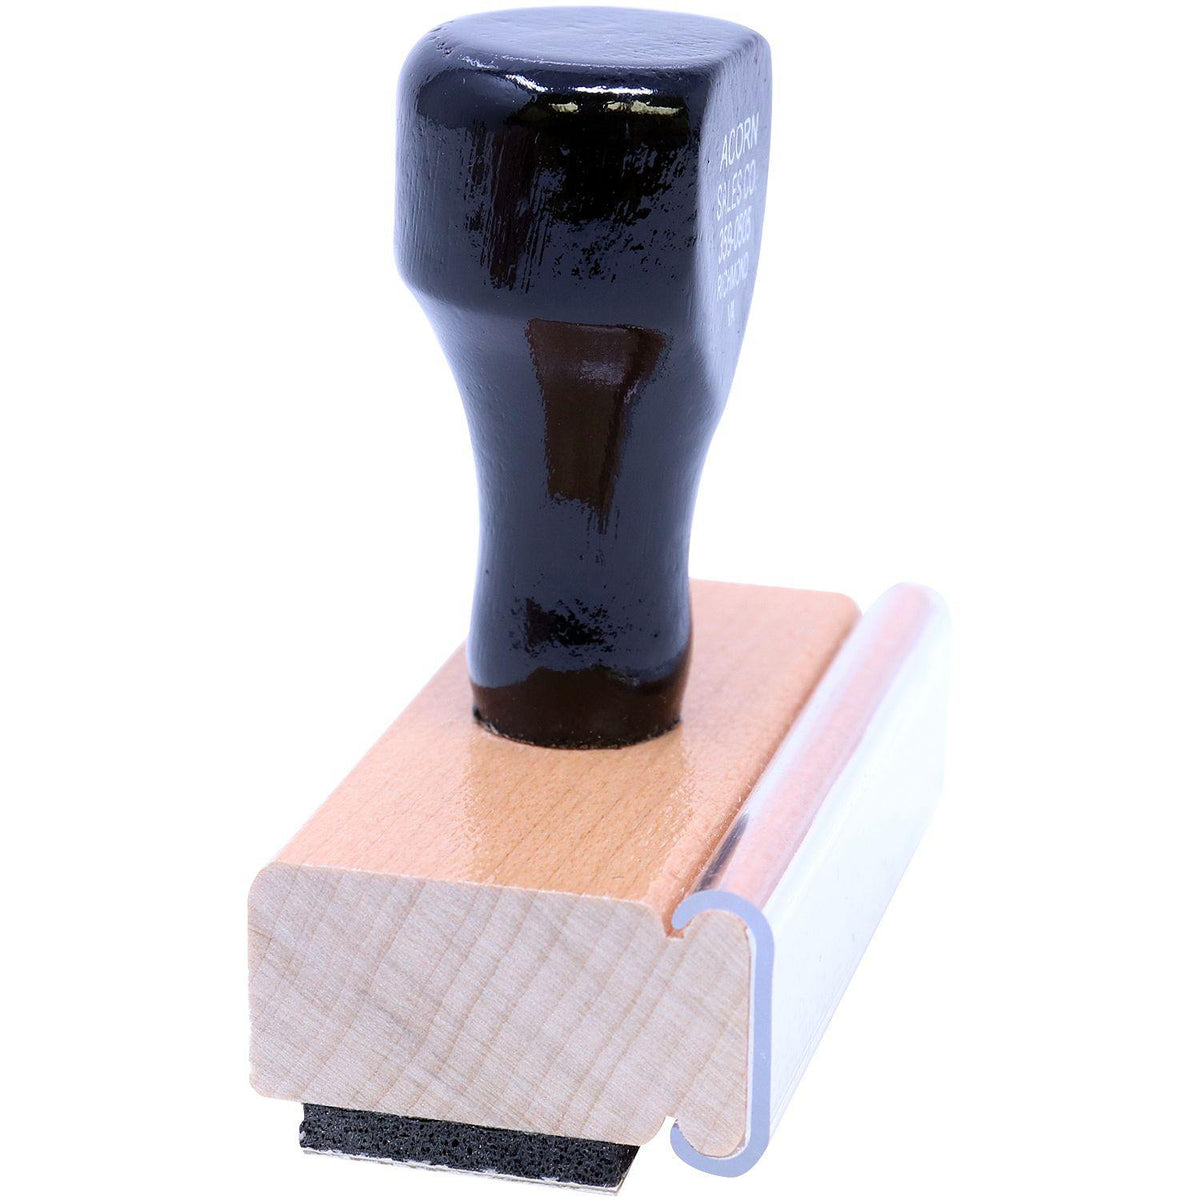 Side View of Large Photographs Do Not Bend Rubber Stamp at an Angle